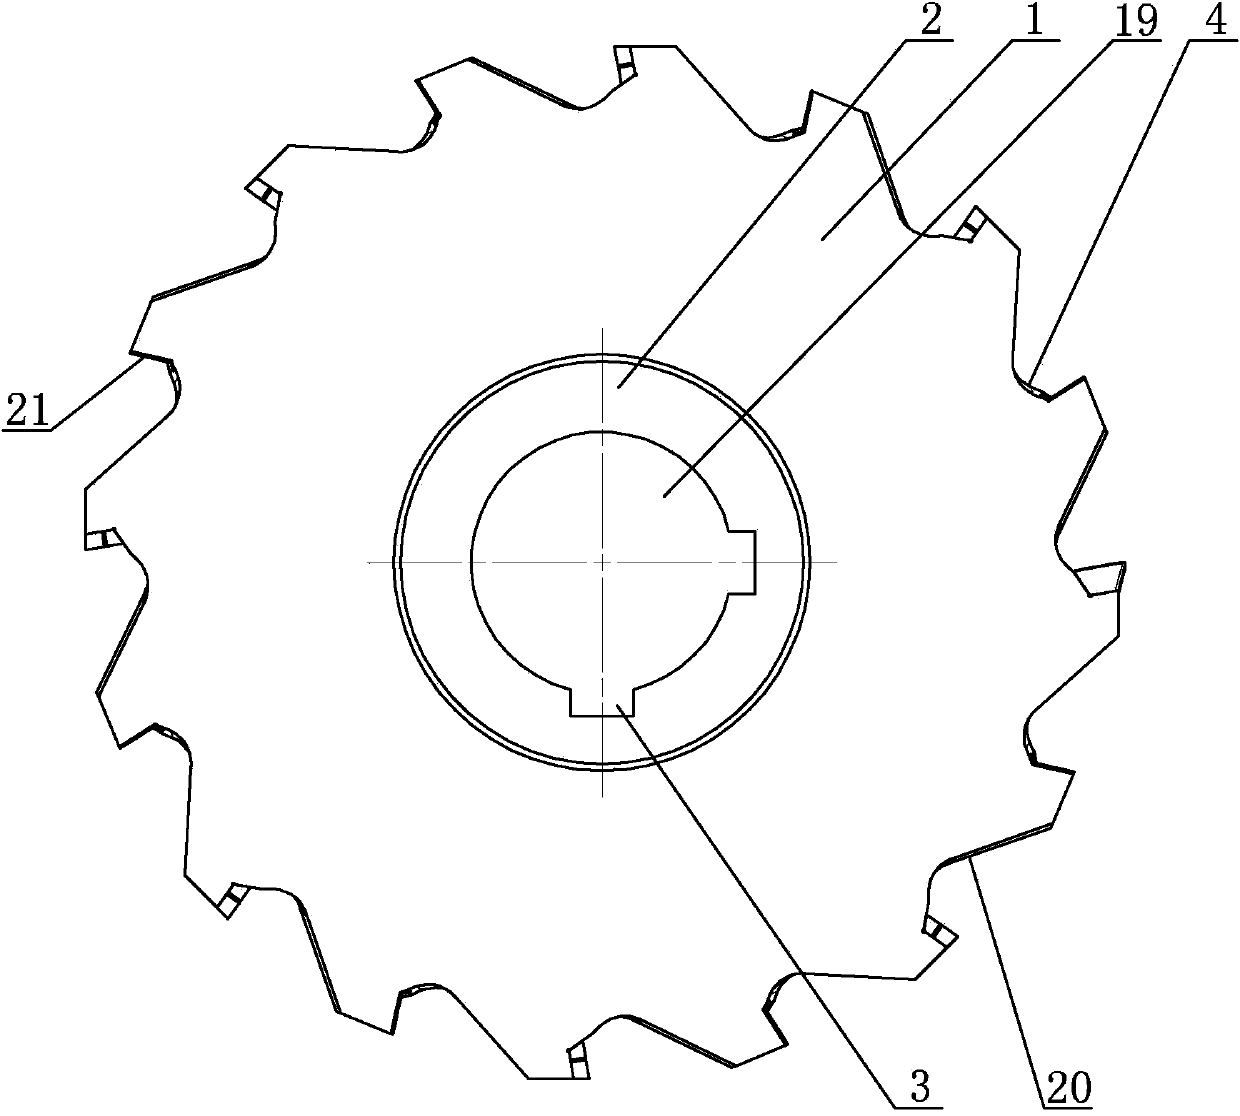 Special cutting-width-variable three-edge milling cutter for grooving overall blade disk